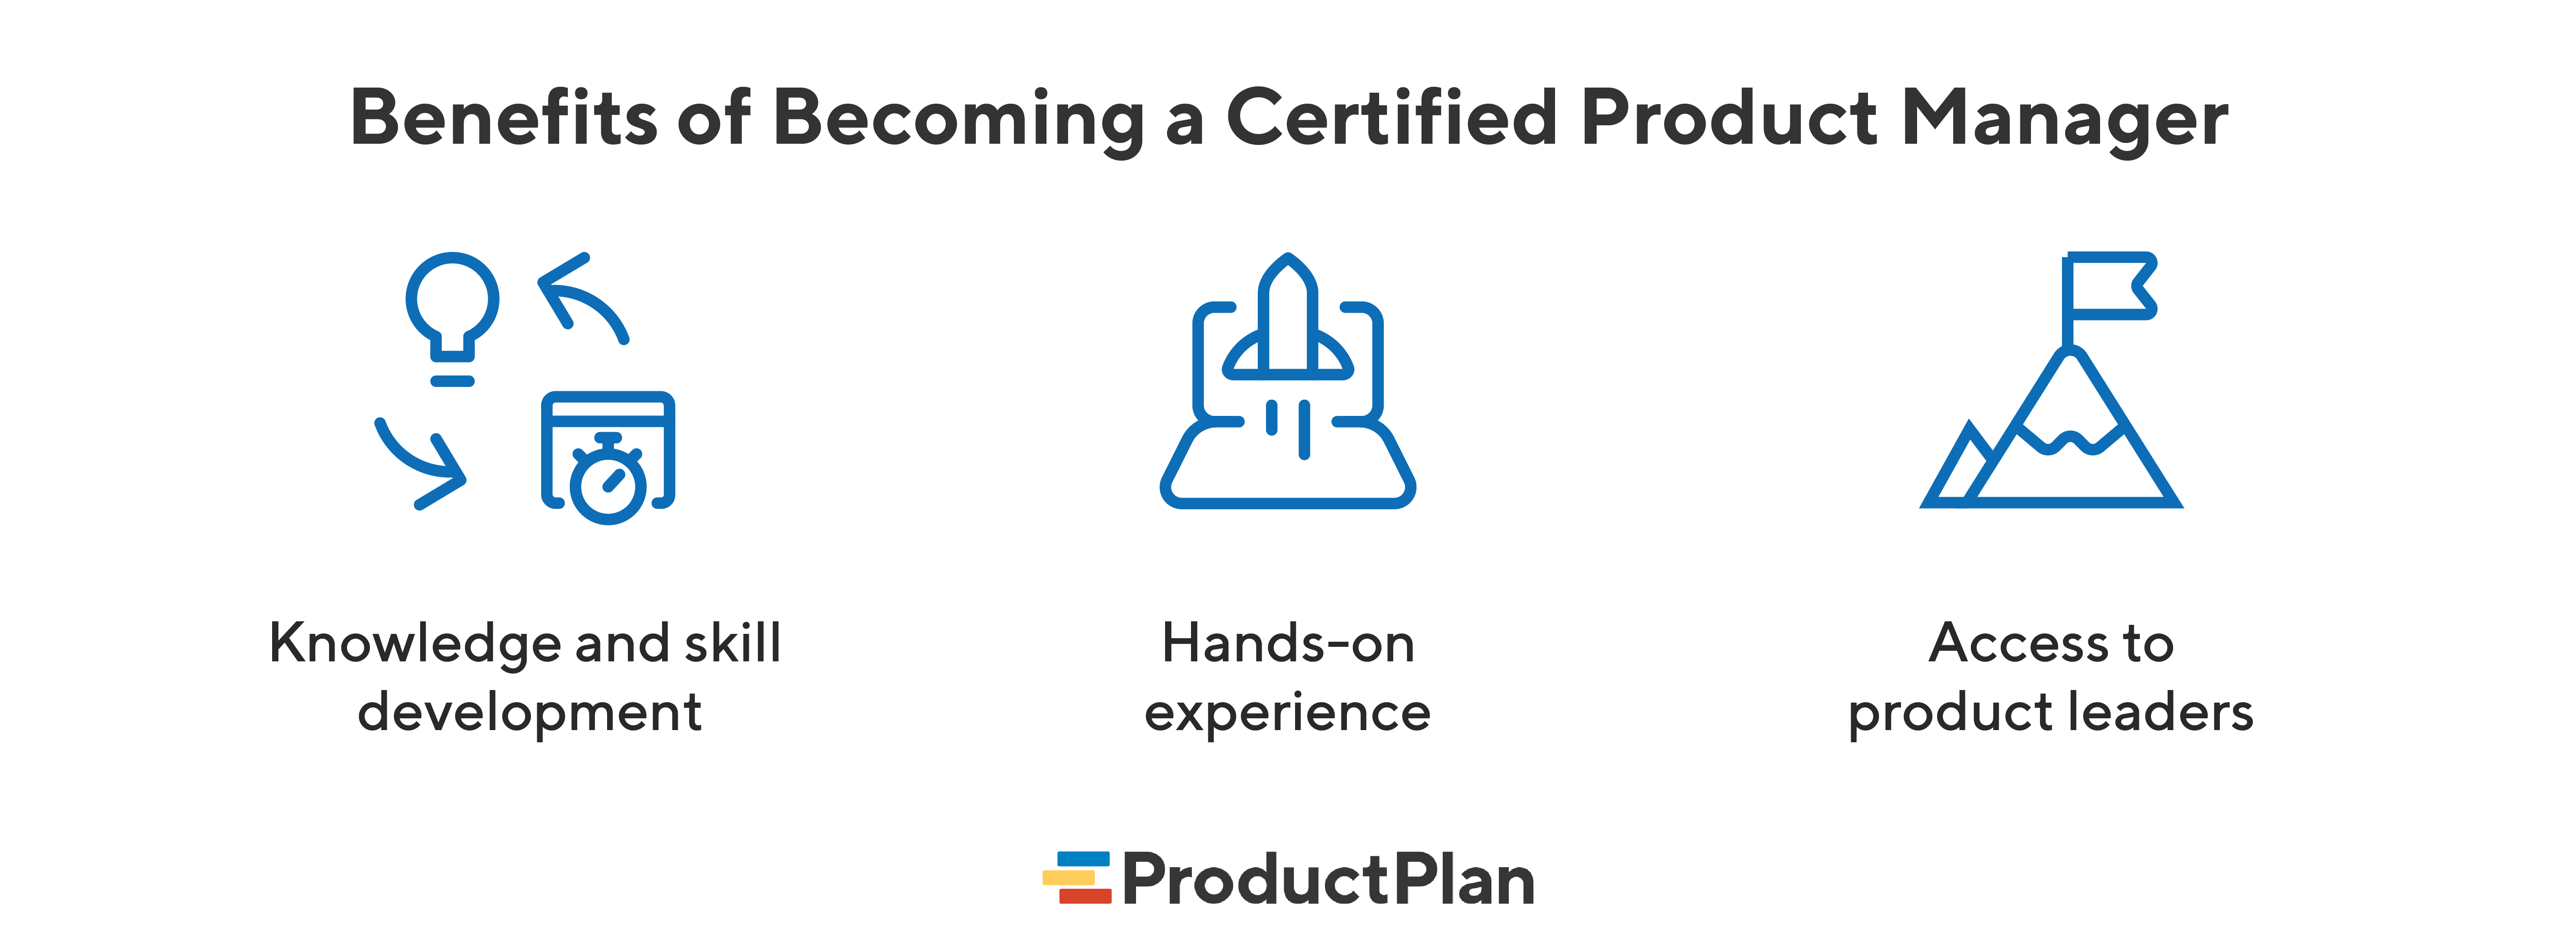 Benefits of Becoming a Certified Product Manager | ProductPlan